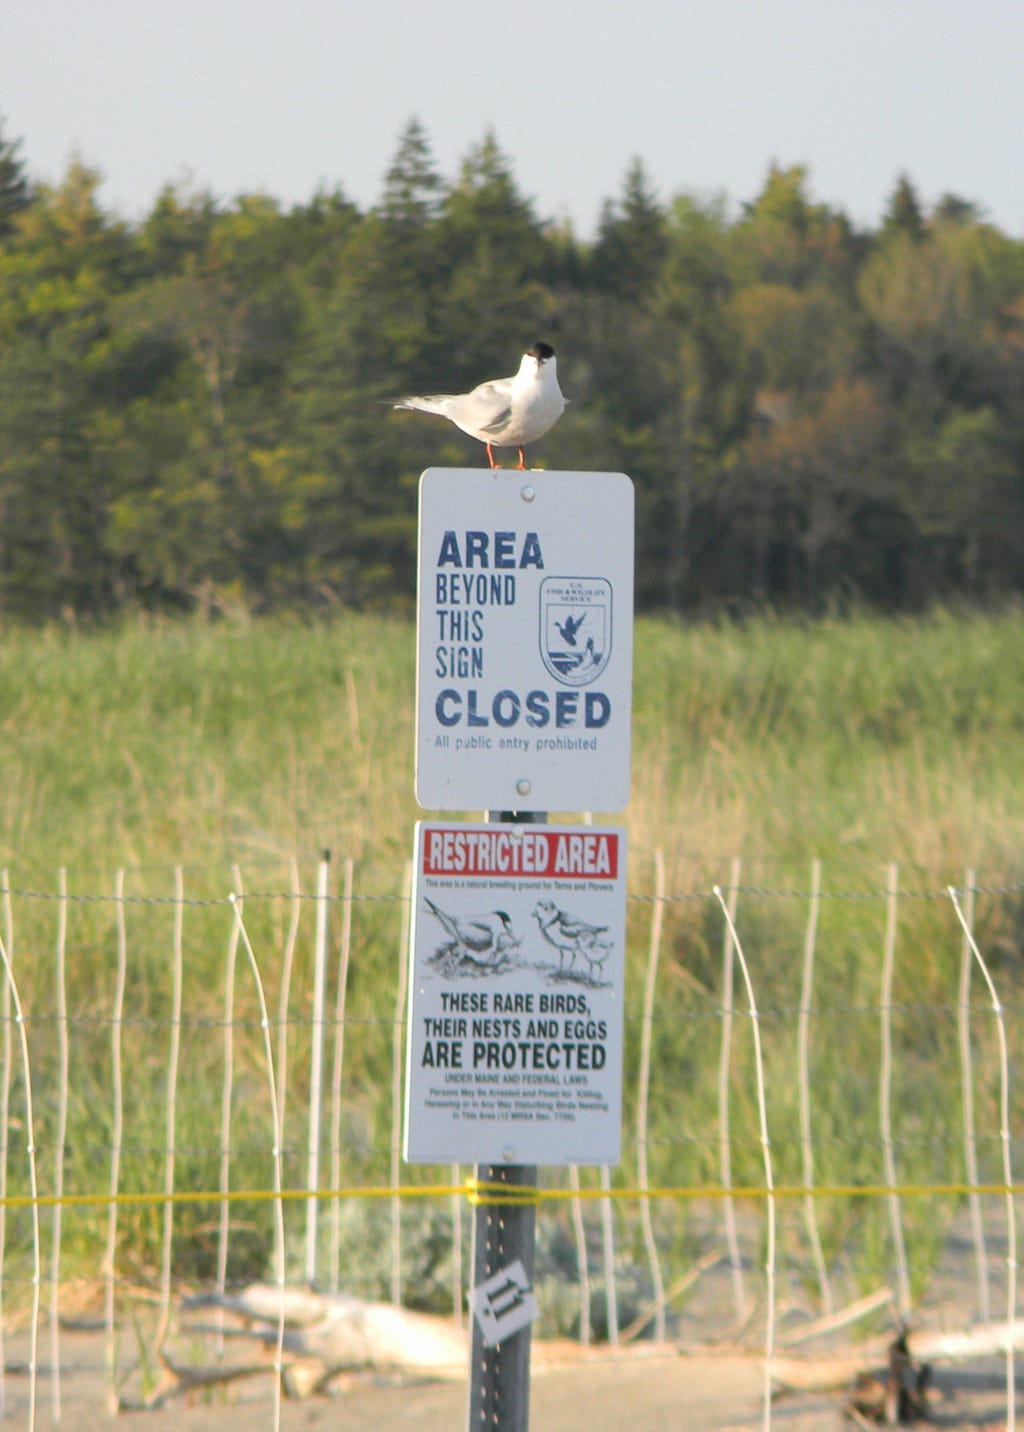 A black and white shorebird sits on a sign that says “Area beyond this sign is closed” and “Restricted area, these rare birds, their nests, and eggs are protected.”